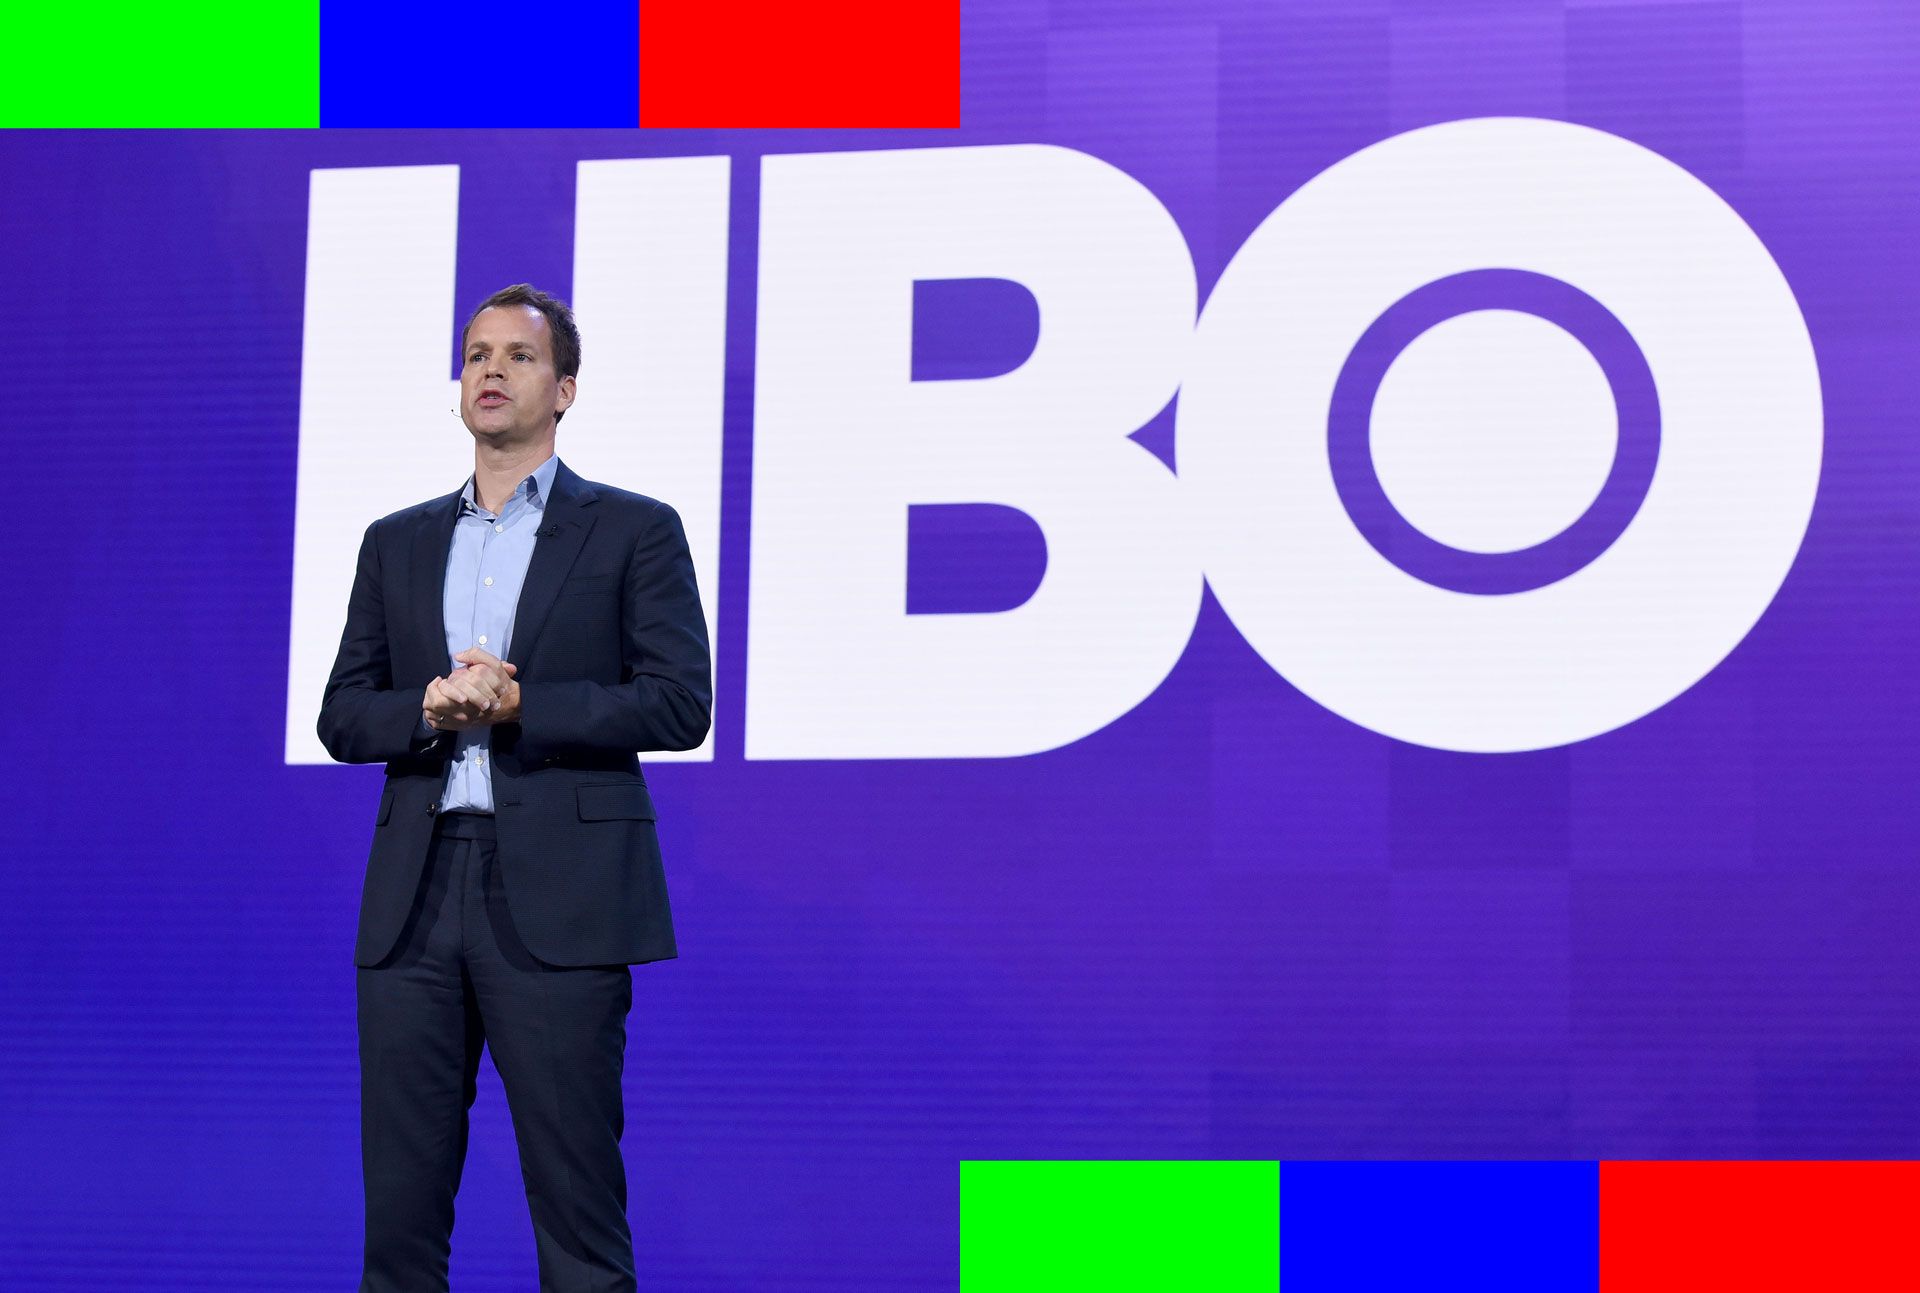 HBO Max Insider on X: HBO Max LATAM with streaming rights to the